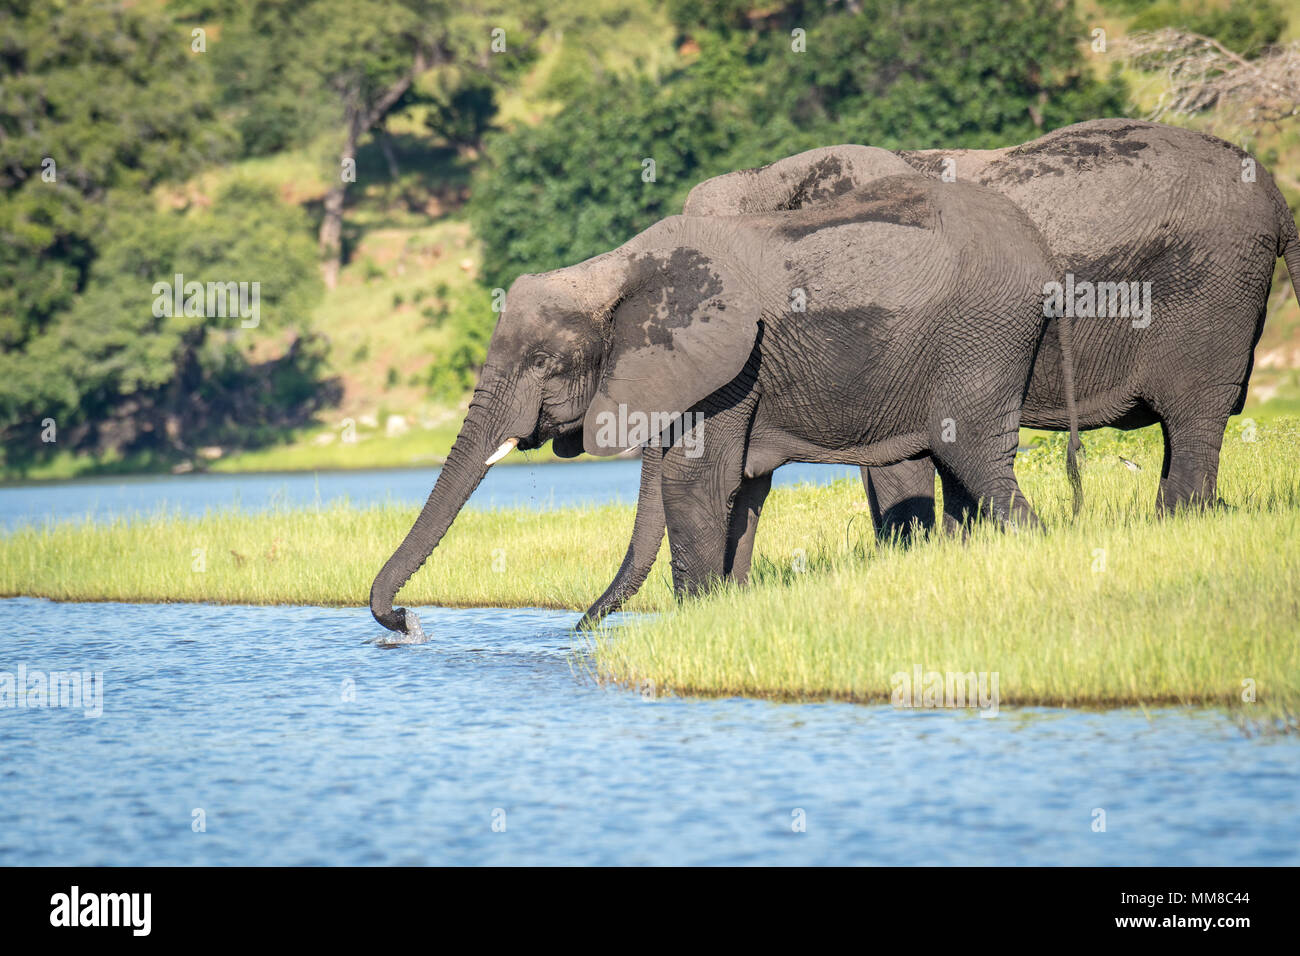 Two elephants use their long trunks to take a drink from the Chobe River. Chobe National Park - Botswana Stock Photo